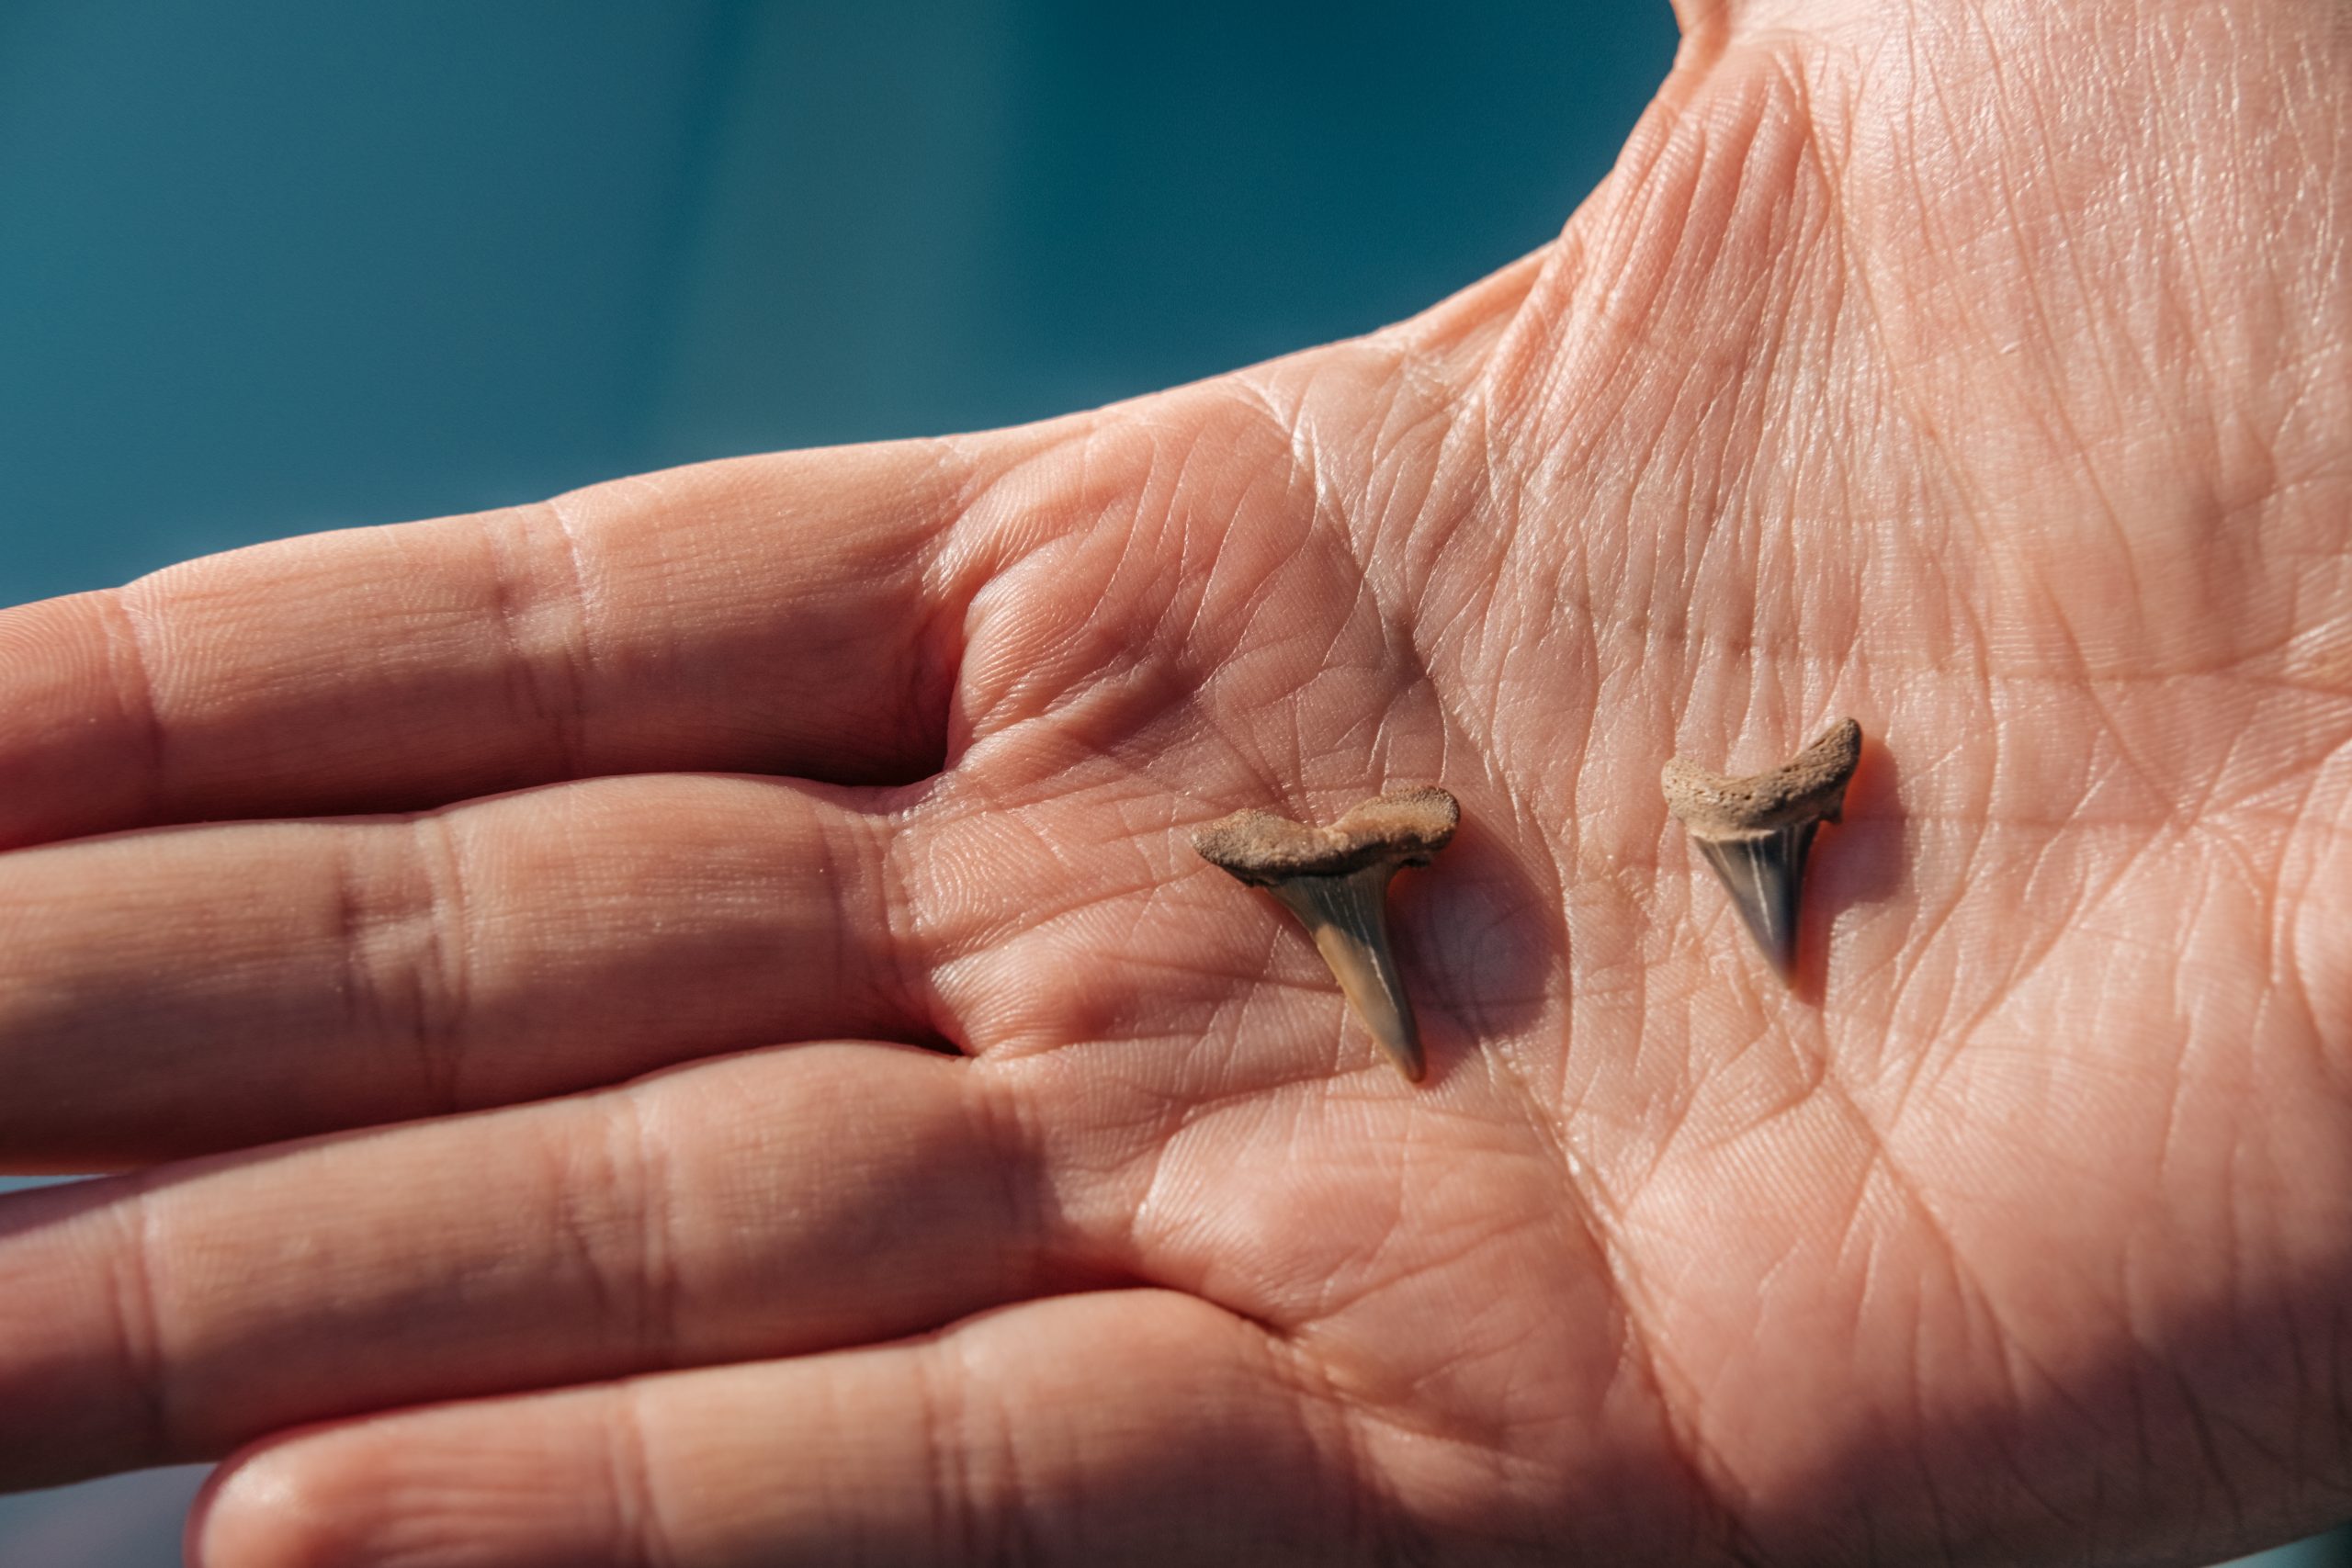 Go fossil hunting in Essex and find shark teeth